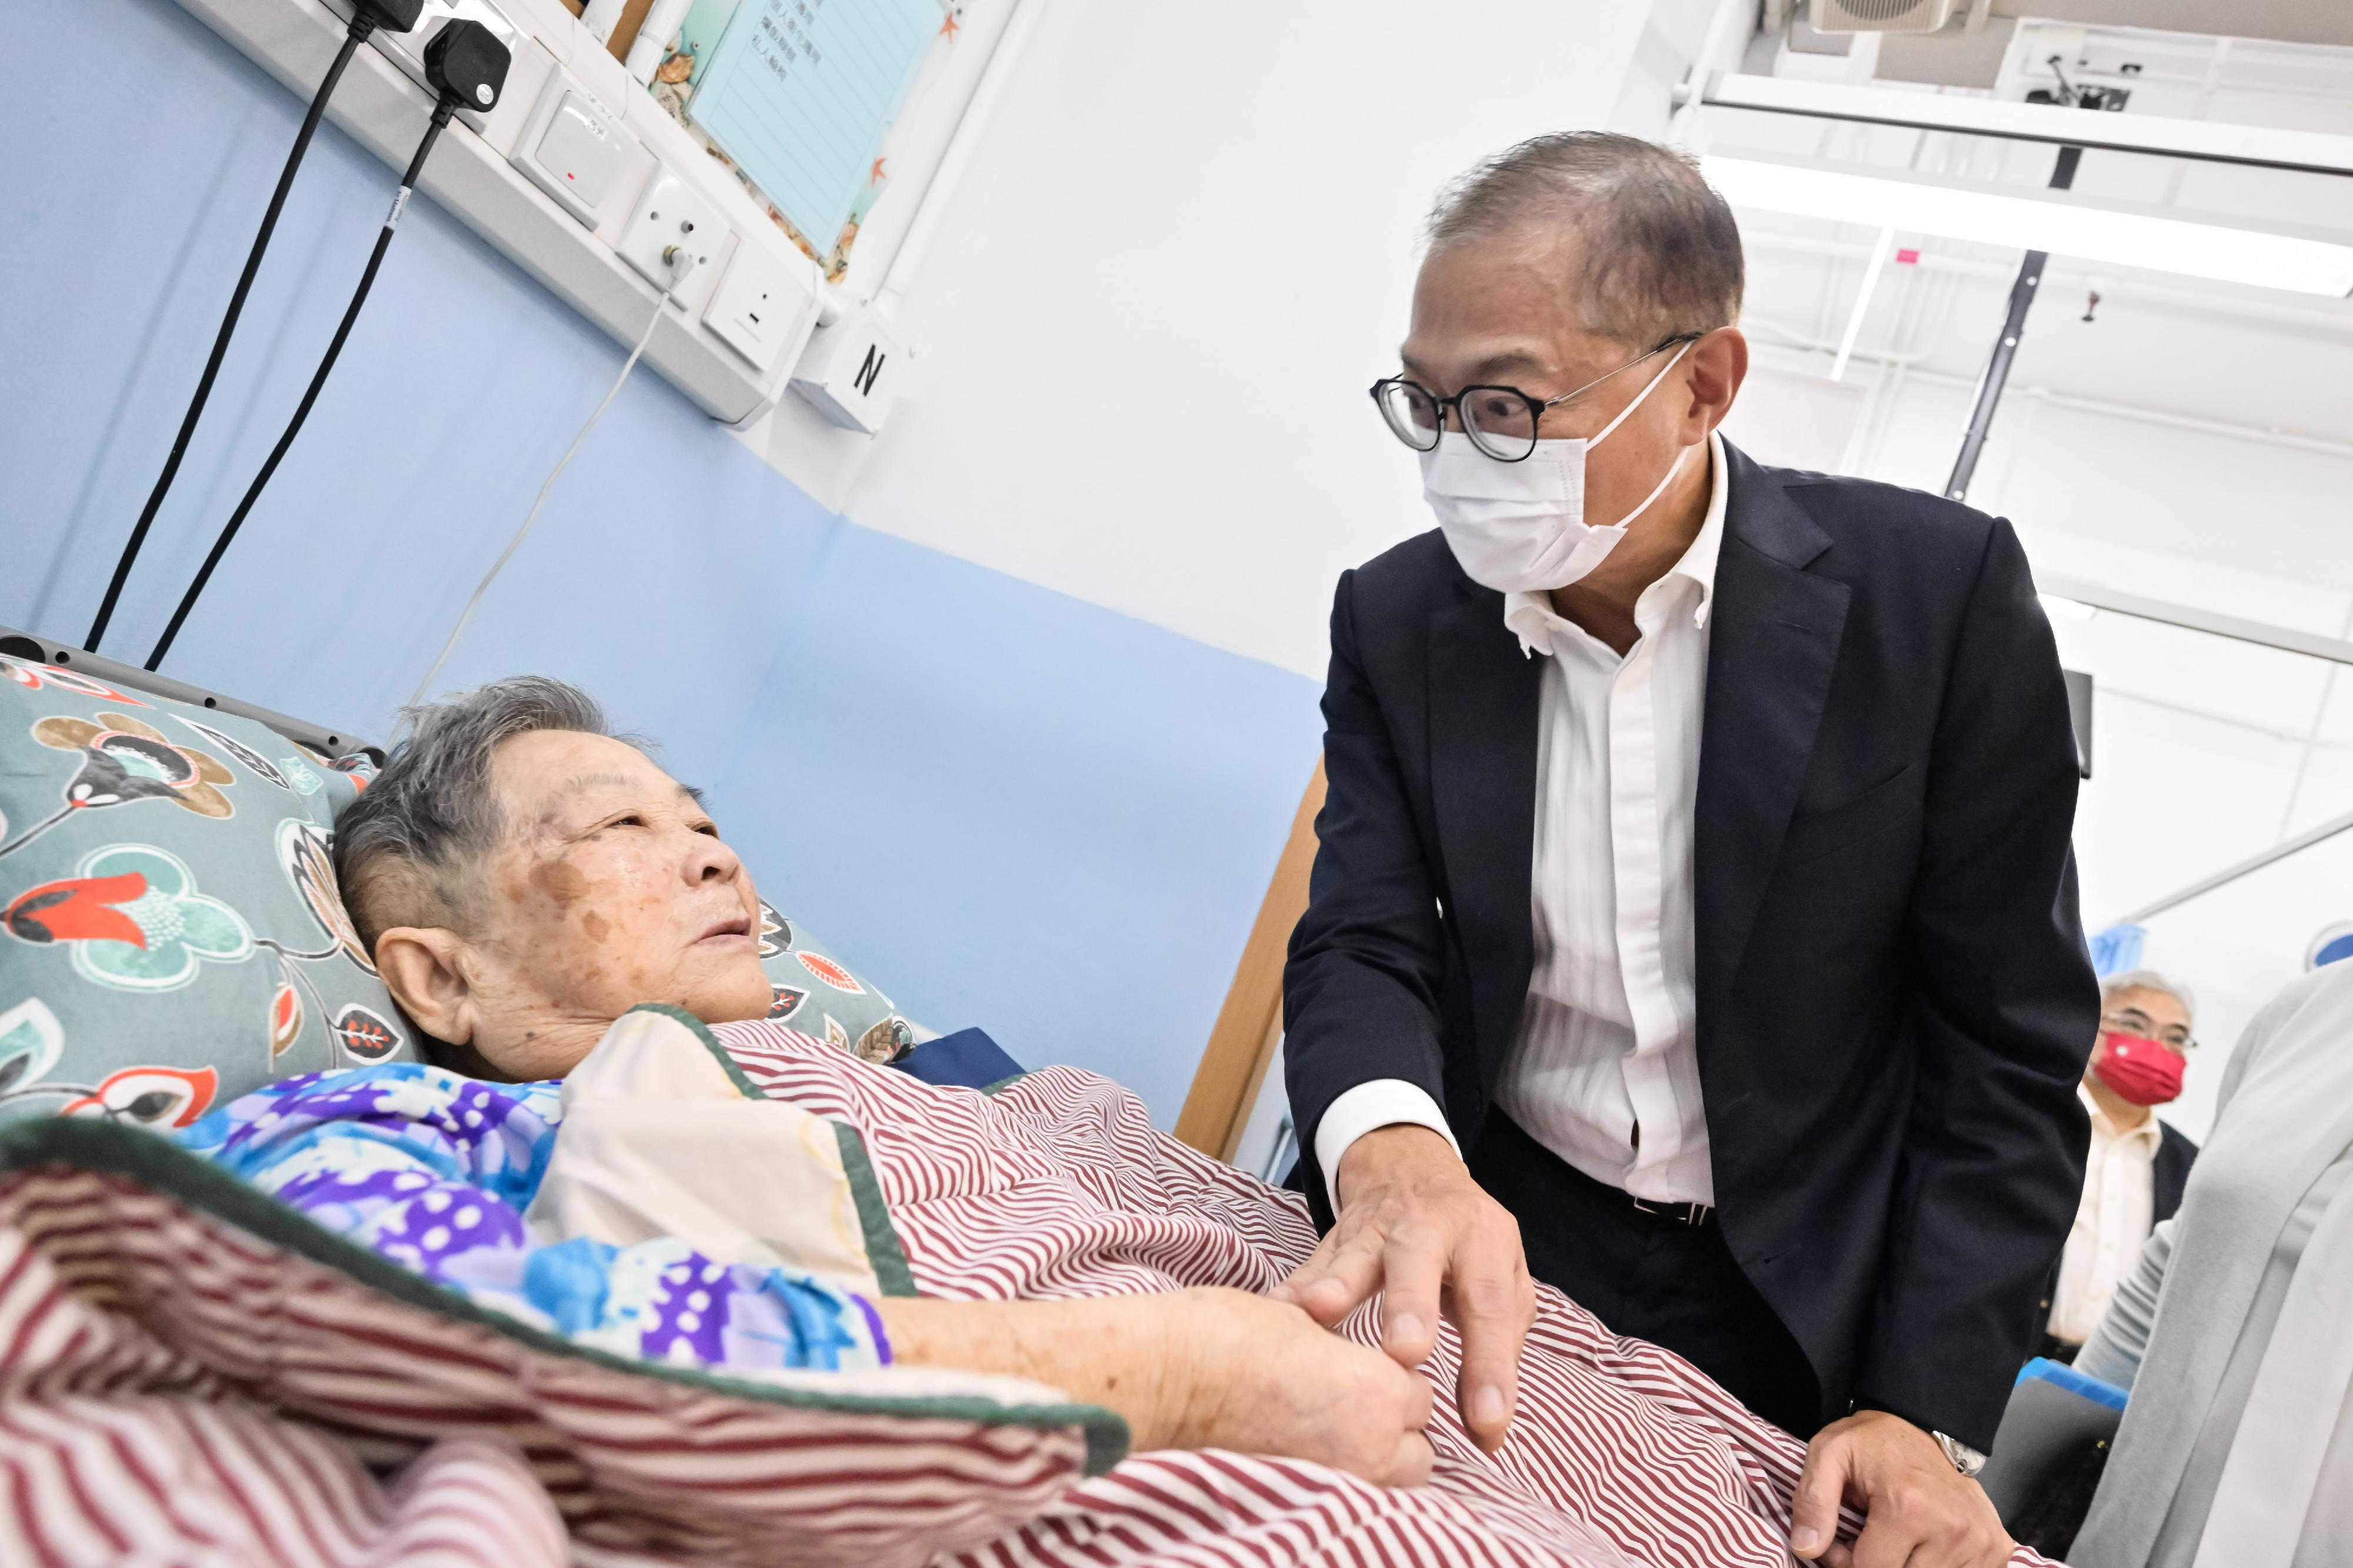 The Secretary for Health, Professor Lo Chung-mau, visited a residential care home for the elderly (RCHE) in Kwai Tsing District this afternoon (November 3) to get a better grasp of the basic dental care services provided to residents of RCHEs by outreach dental teams. Photo shows Professor Lo (right) chatting with a resident of the RCHE to listen to her views on the services.